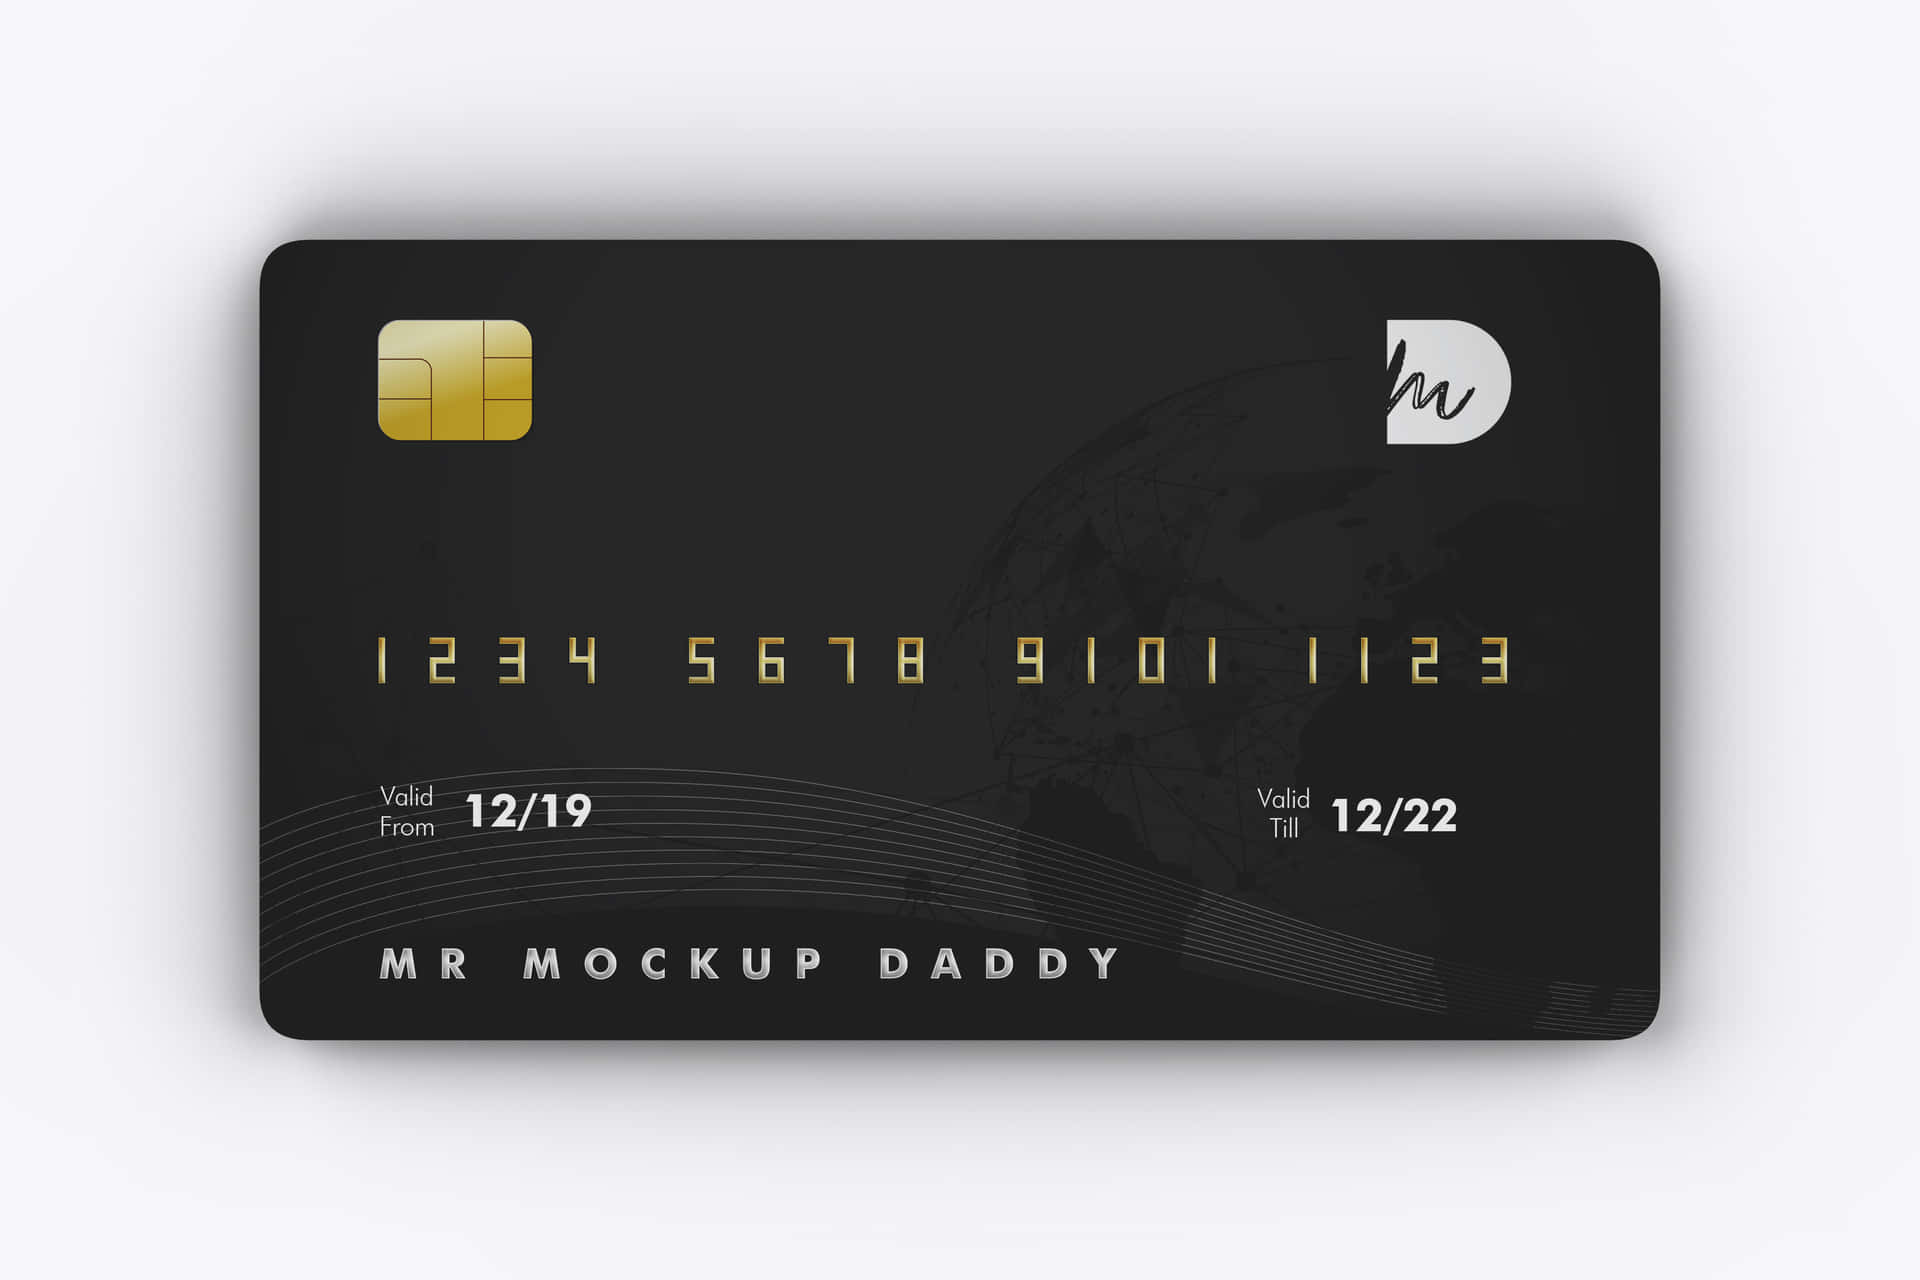 A Credit Card Mockup On A White Background